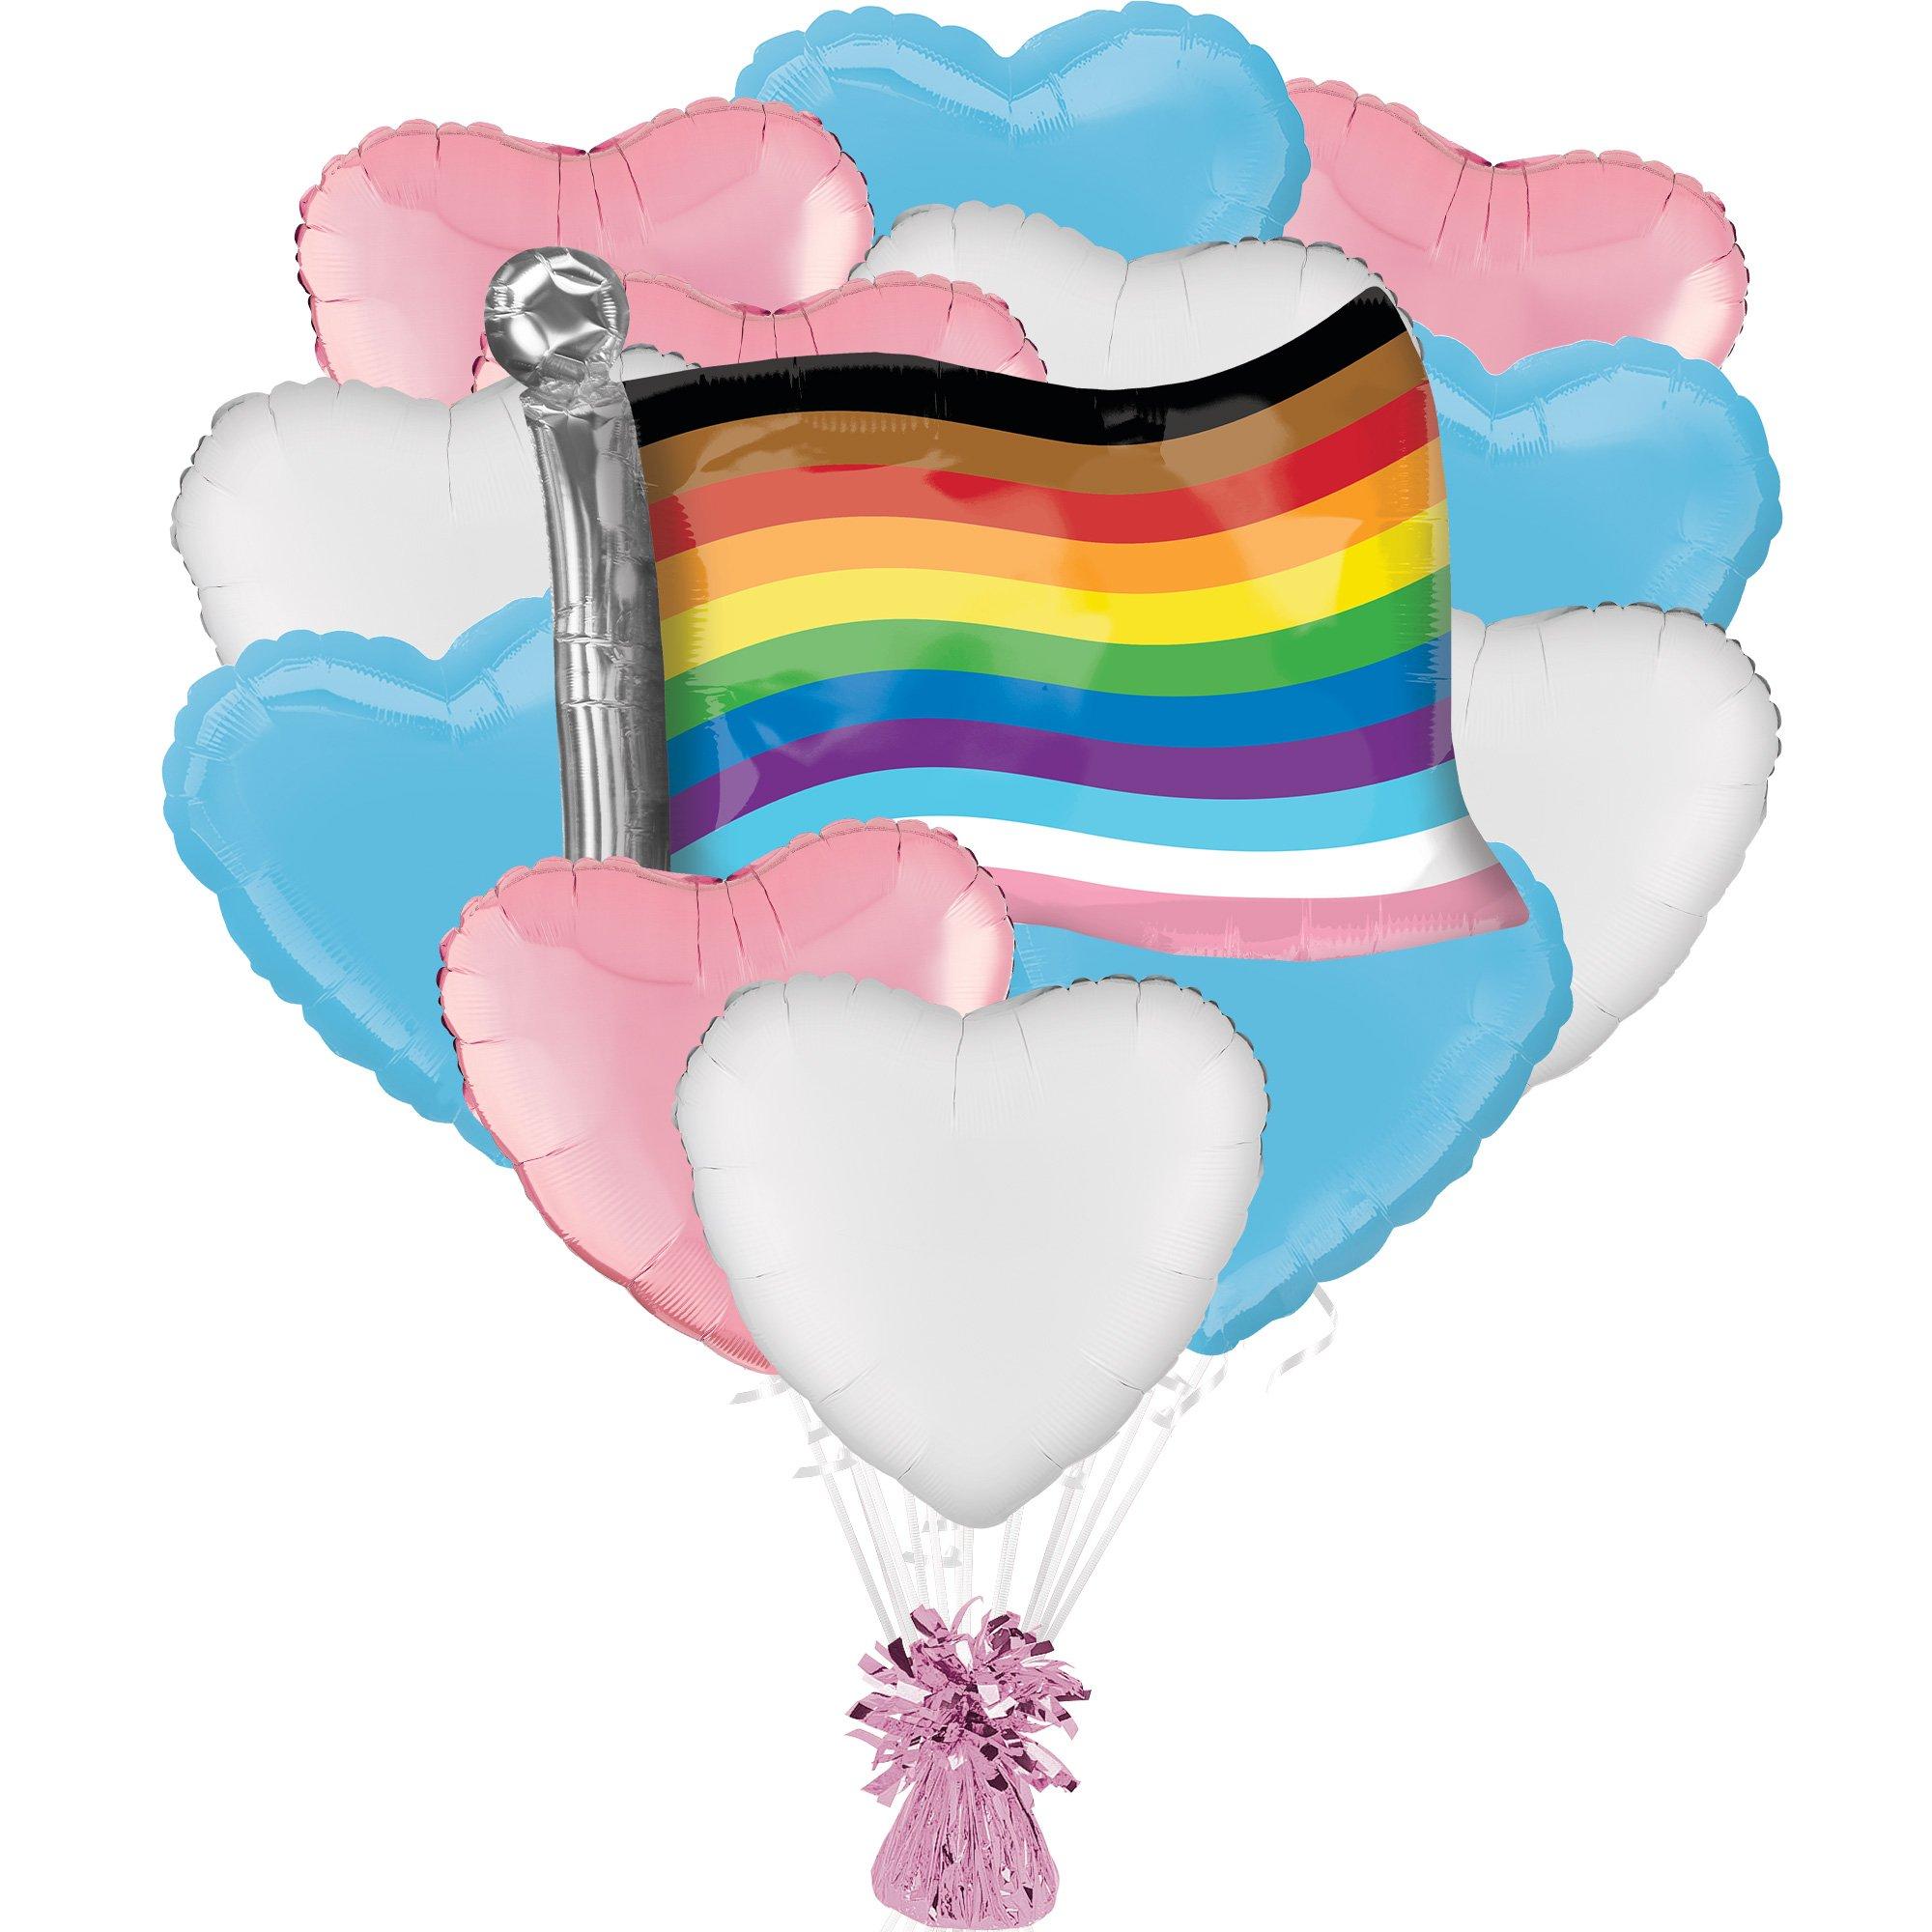 Trans Hearts & Pride Flag Foil Balloon Bouquet with Balloon Weight, 14pc